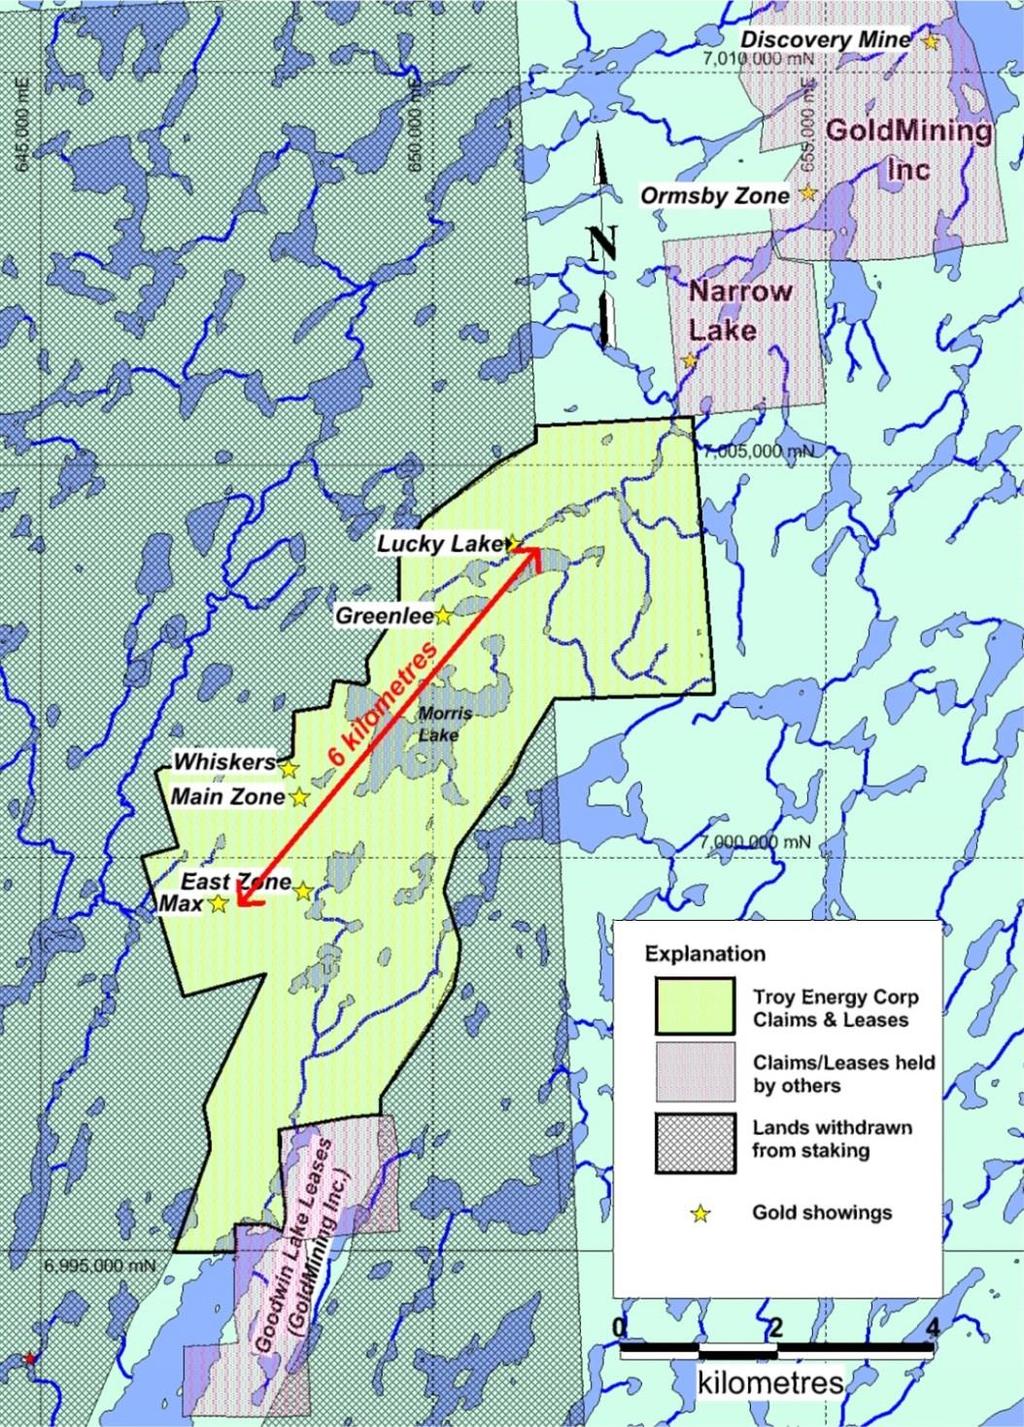 Troy Energy: apart from the Main zone, which has a drill indicated resource potential of 500,000 tonnes averaging 10 g/t gold, other drill tested gold showings occur on the property : namely, East